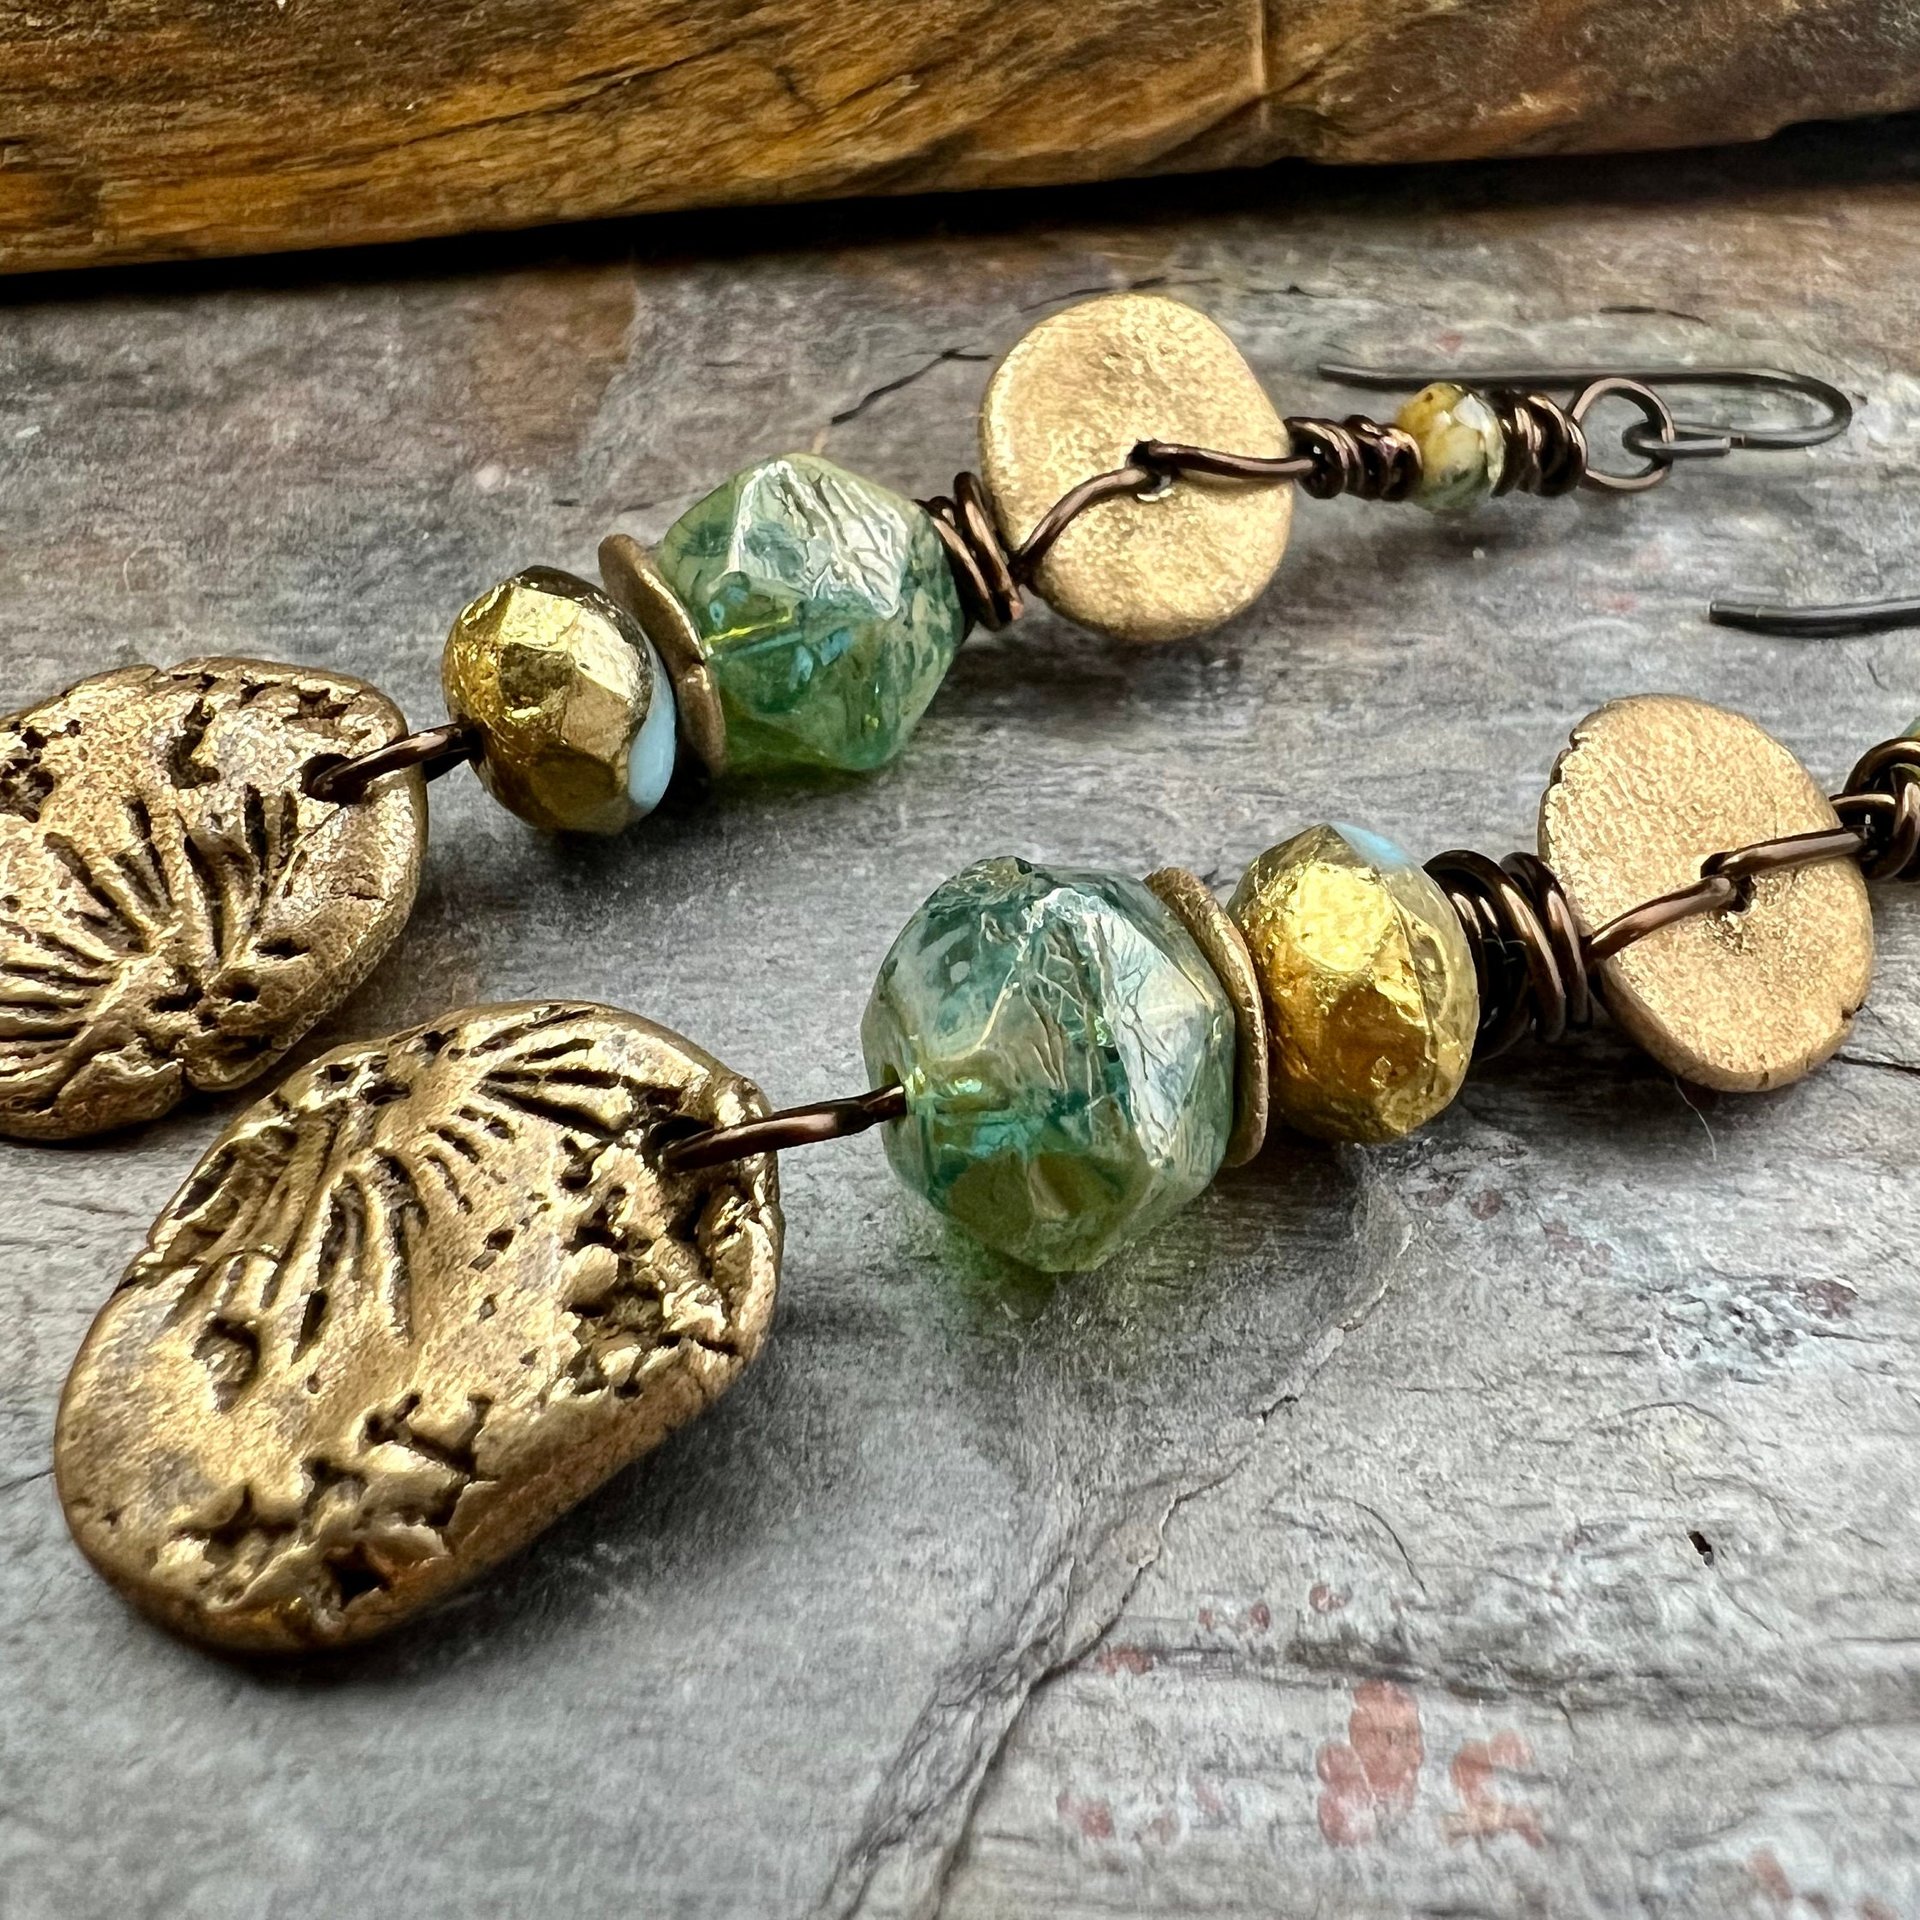 Bronze Coral Fossil Texture Earrings, Stacked Cairns, Washer Donut Beads, Czech Glass, Bronze & Aqua, Arty Mismatched Earrings, Long Dangles